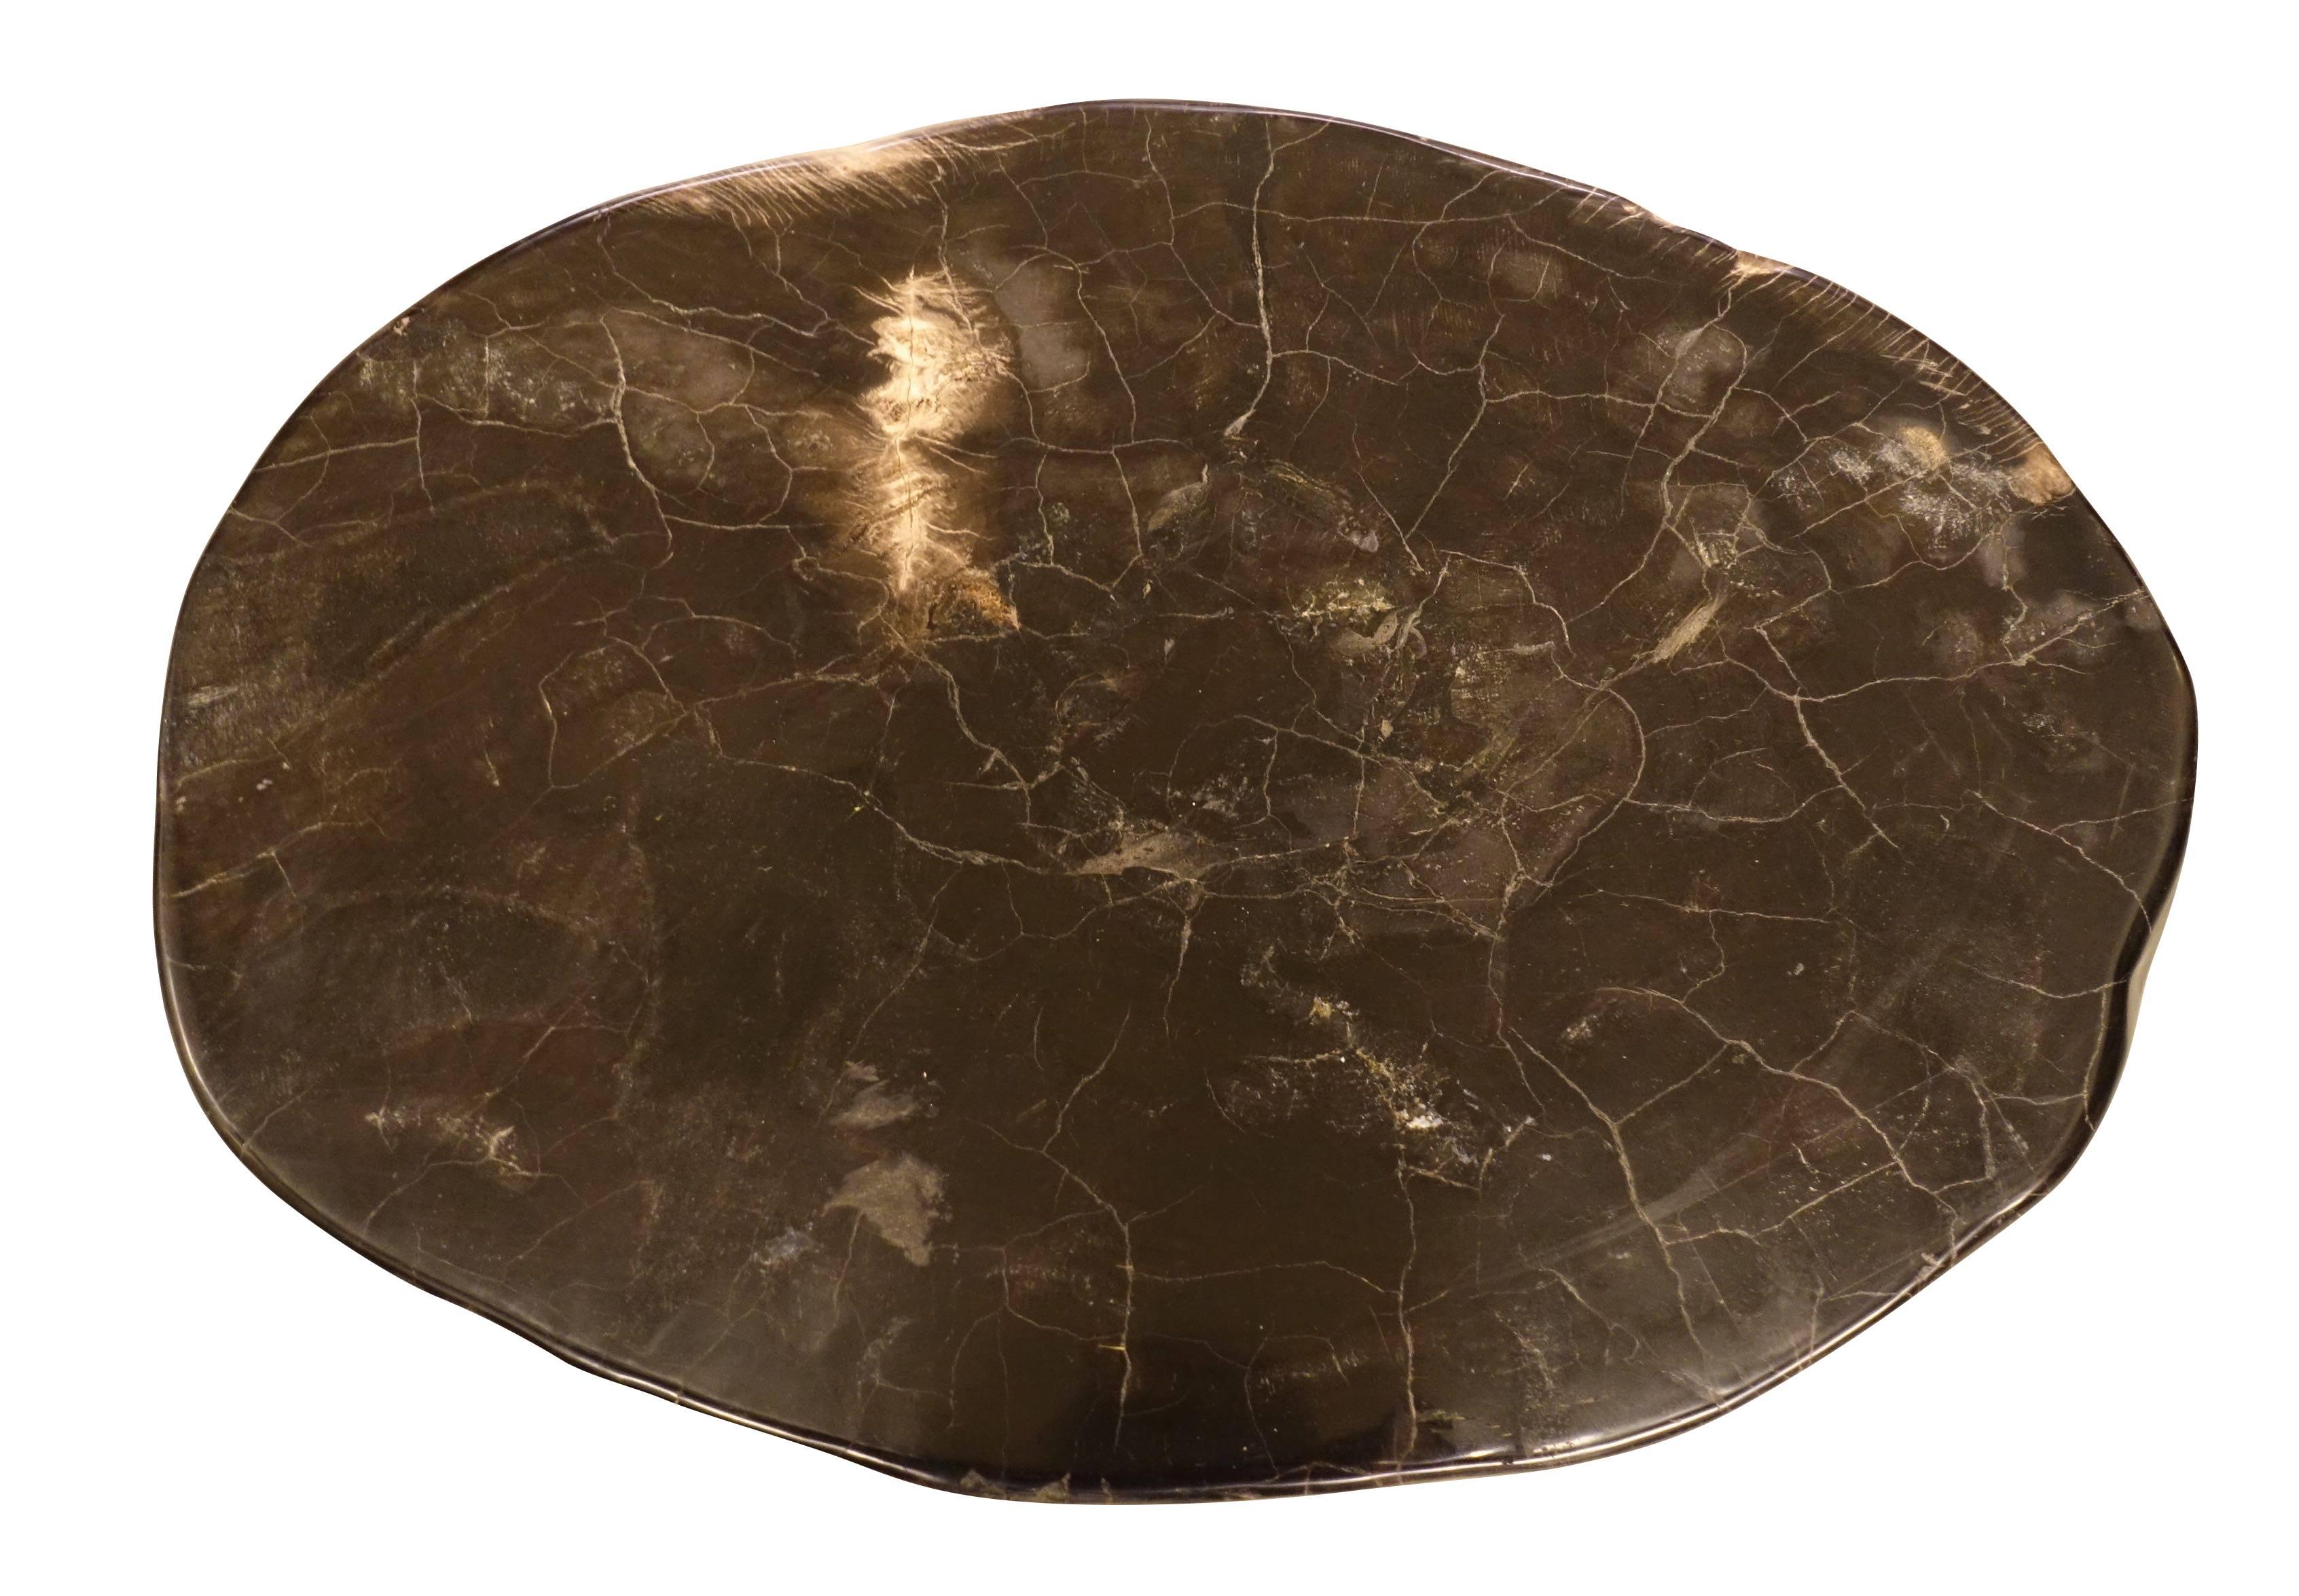 Contemporary Indonesian highly polished oval shaped smooth petrified wood cocktail table.
Black with areas of cream.
